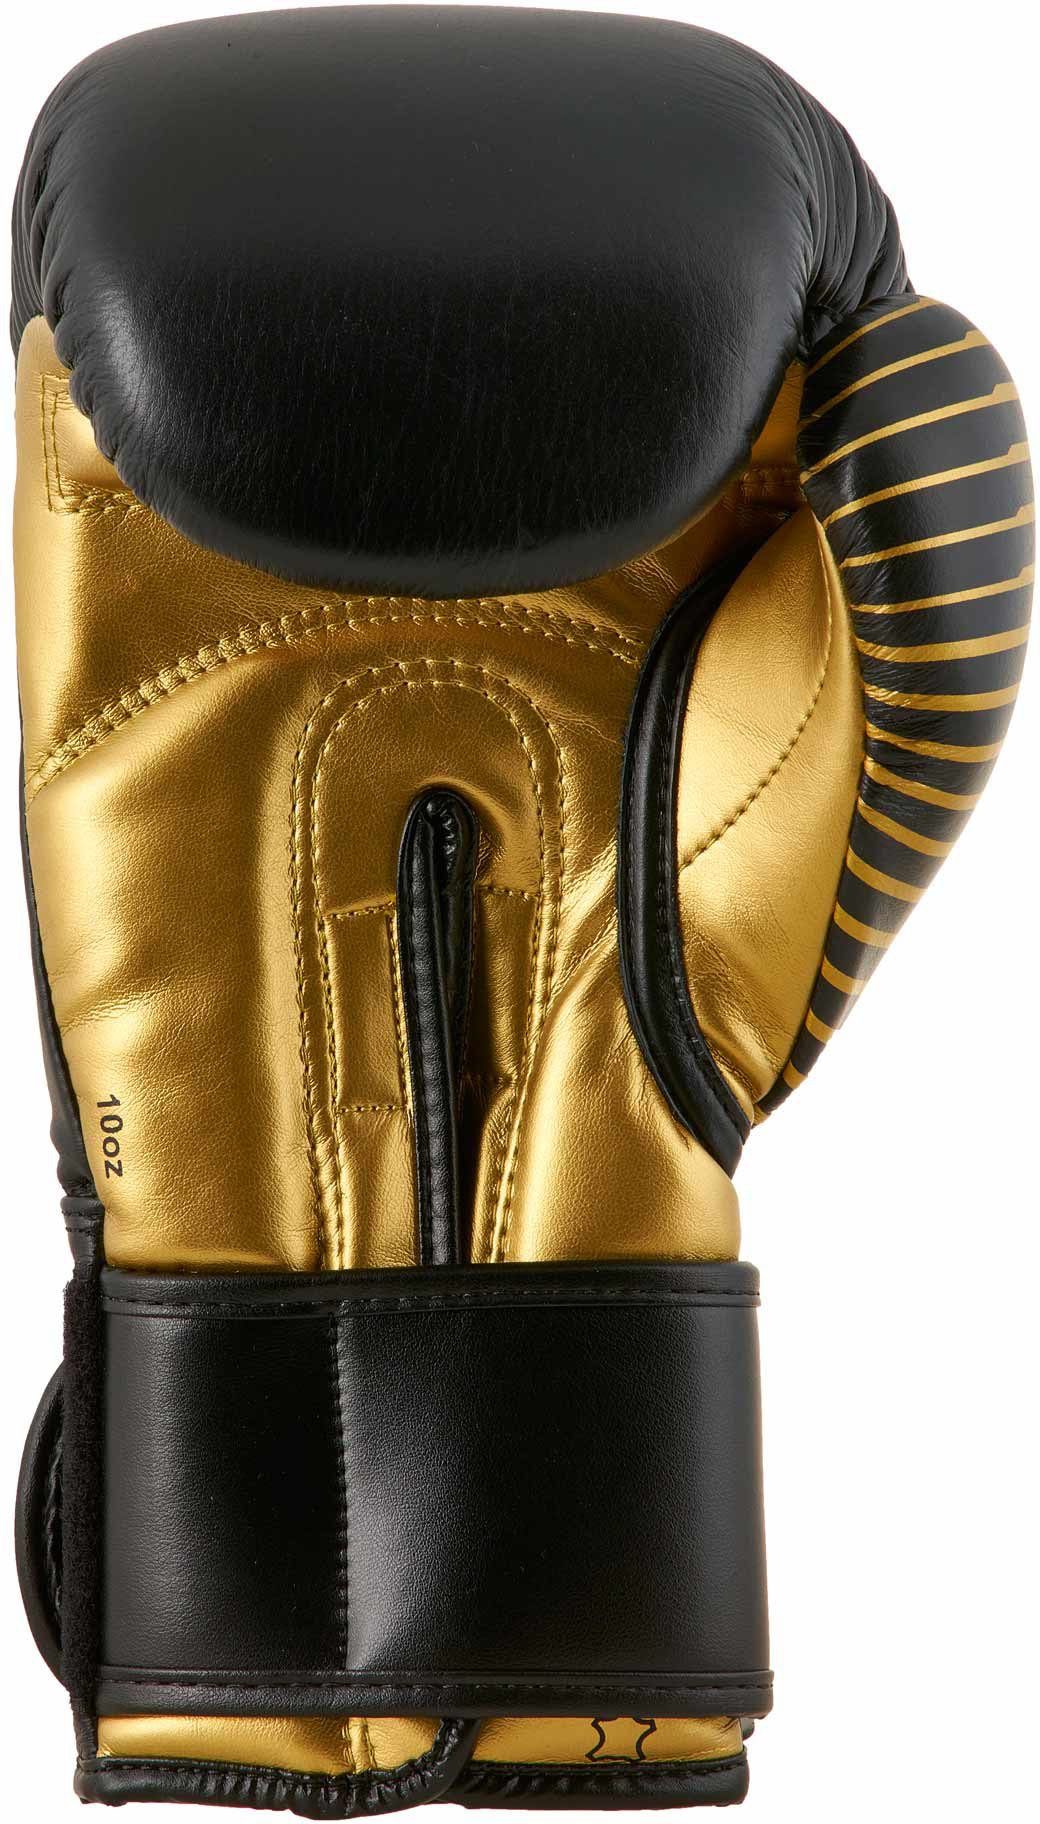 Performance Competition black/gold Handschuh adidas Boxhandschuhe